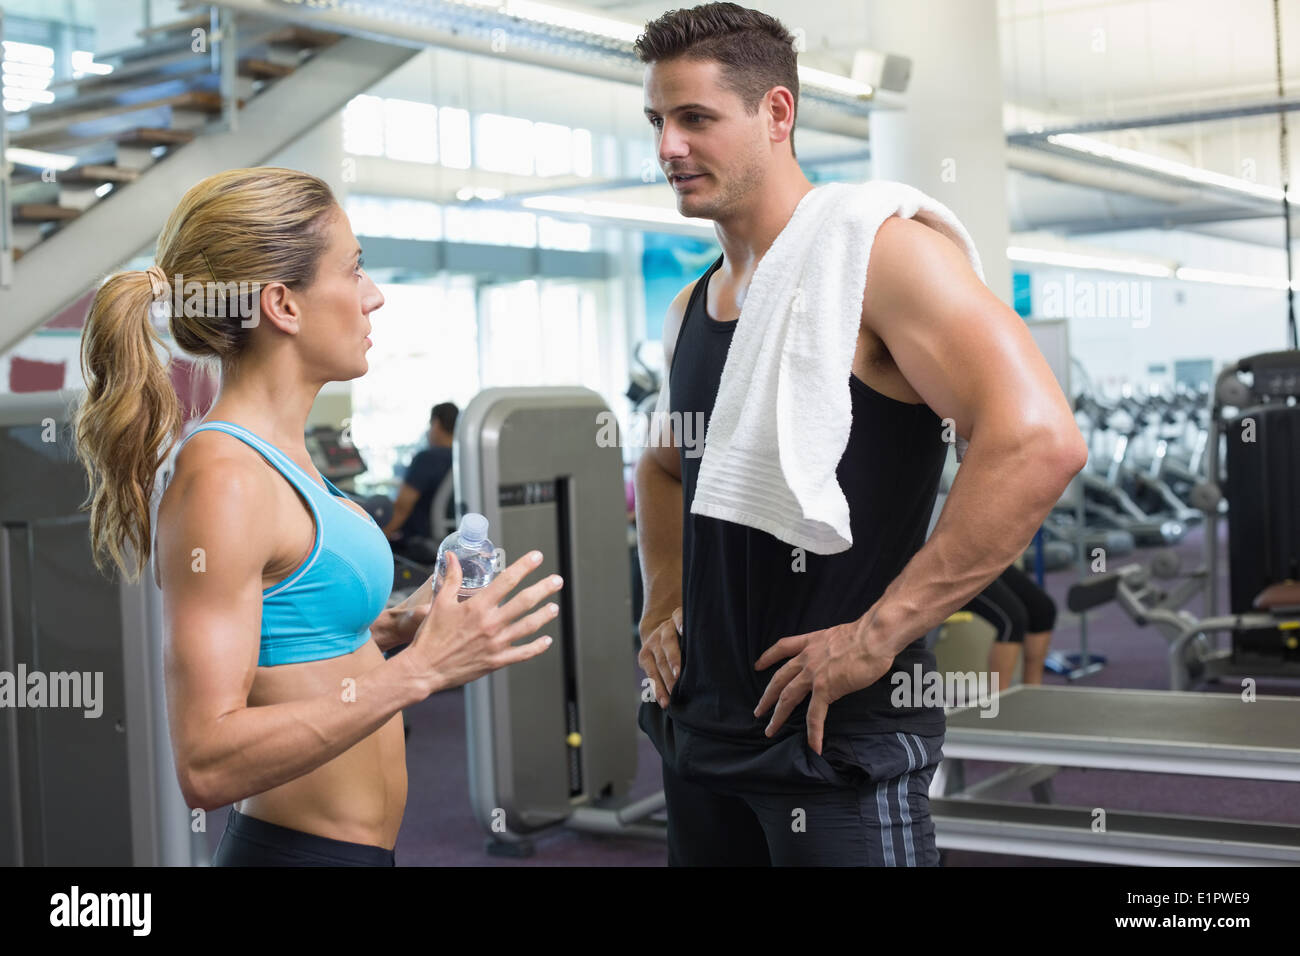 Bodybuilding man and woman talking together Stock Photo